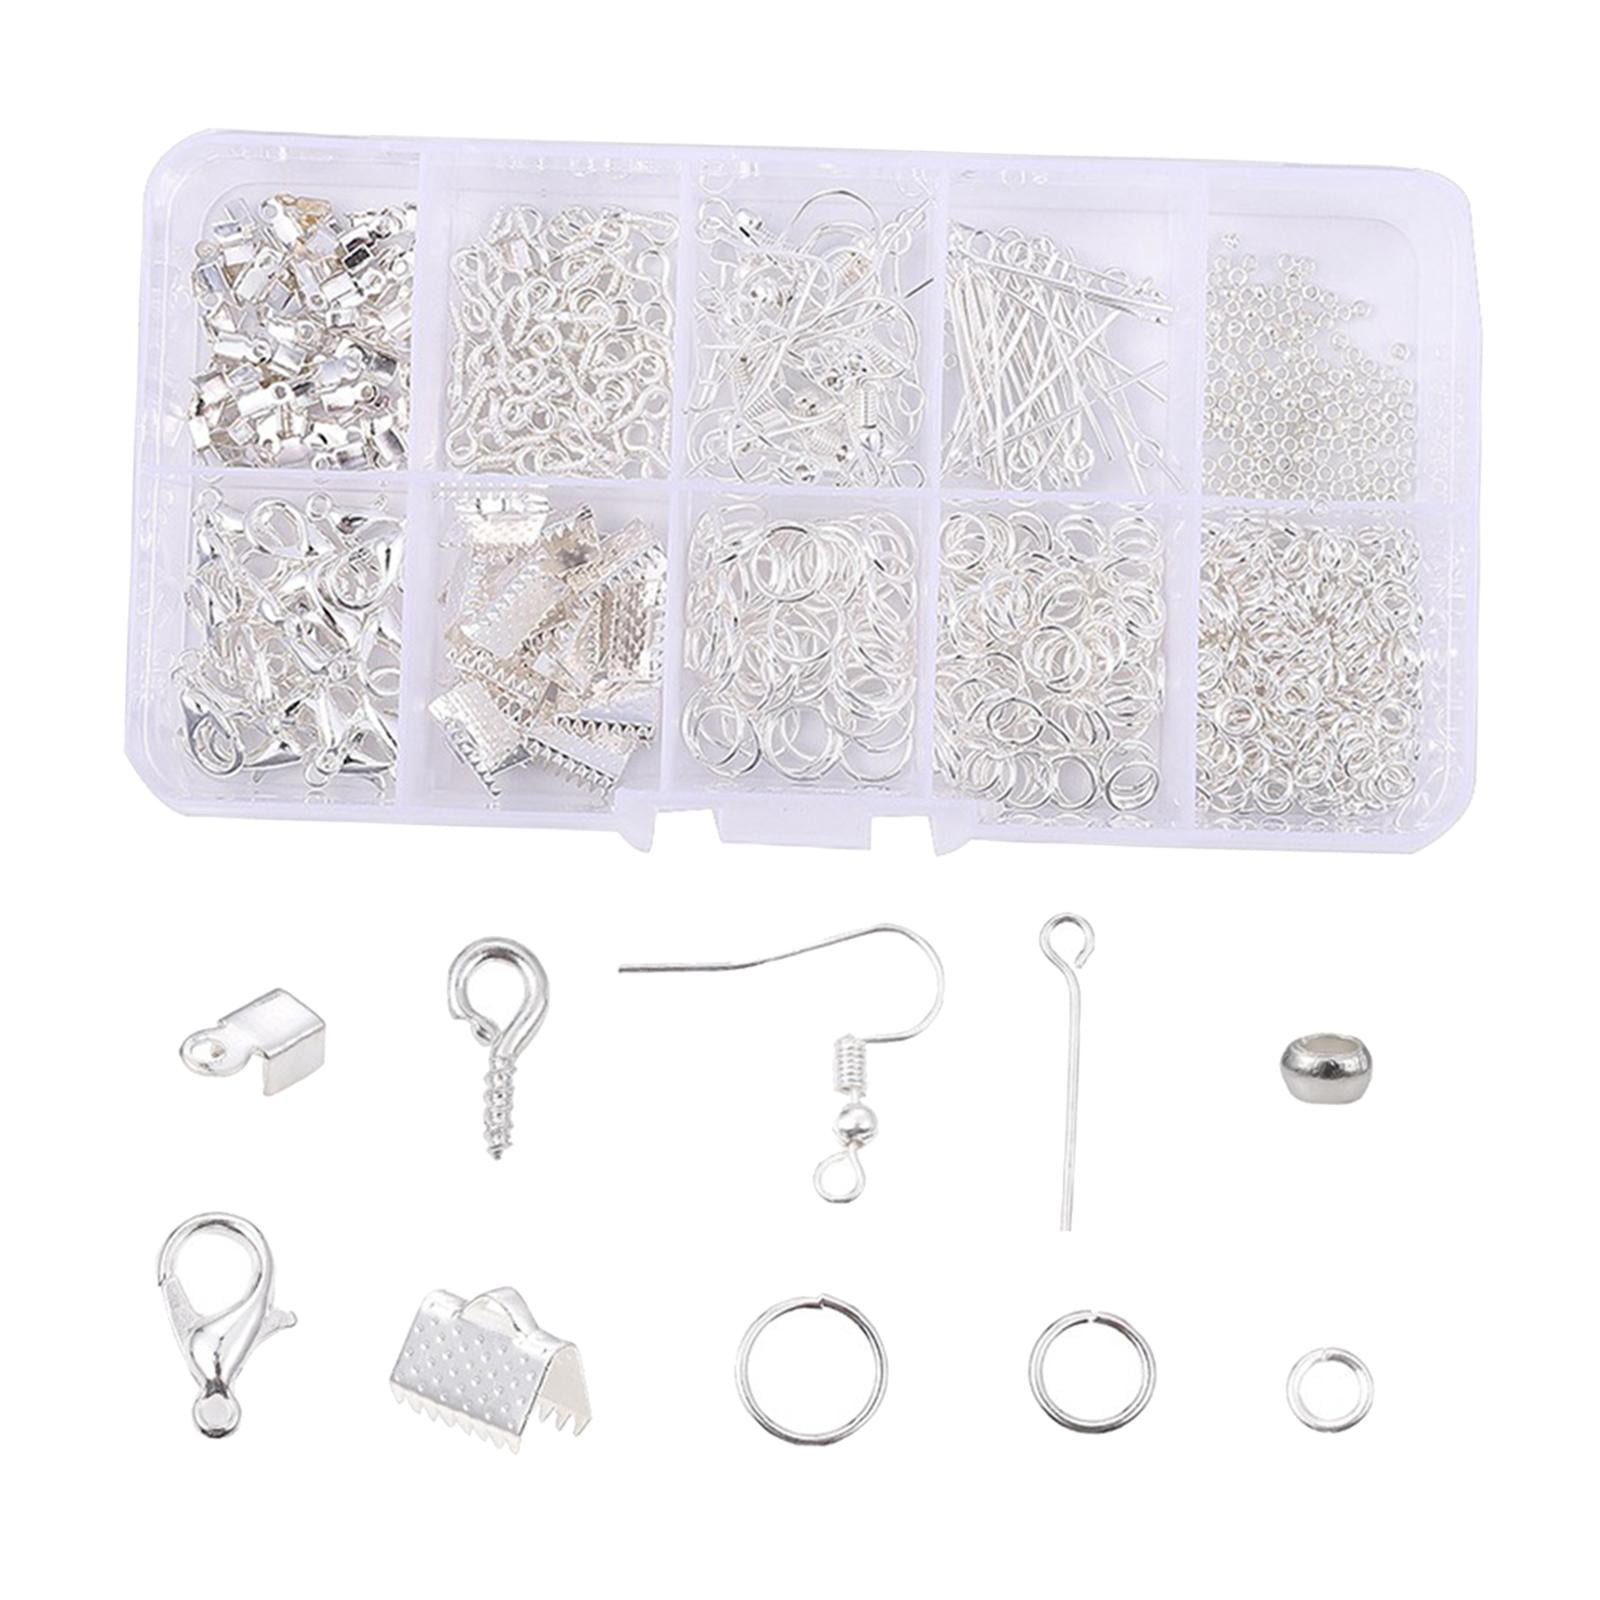 Earring Making Supplies Kit, 2418pcs Earring Hardware Pieces Repair Parts  with Earring Hooks Posts Backs and Jump Rings for Making Earrings Studs and  Jewelry Making (Silver & Gold) 